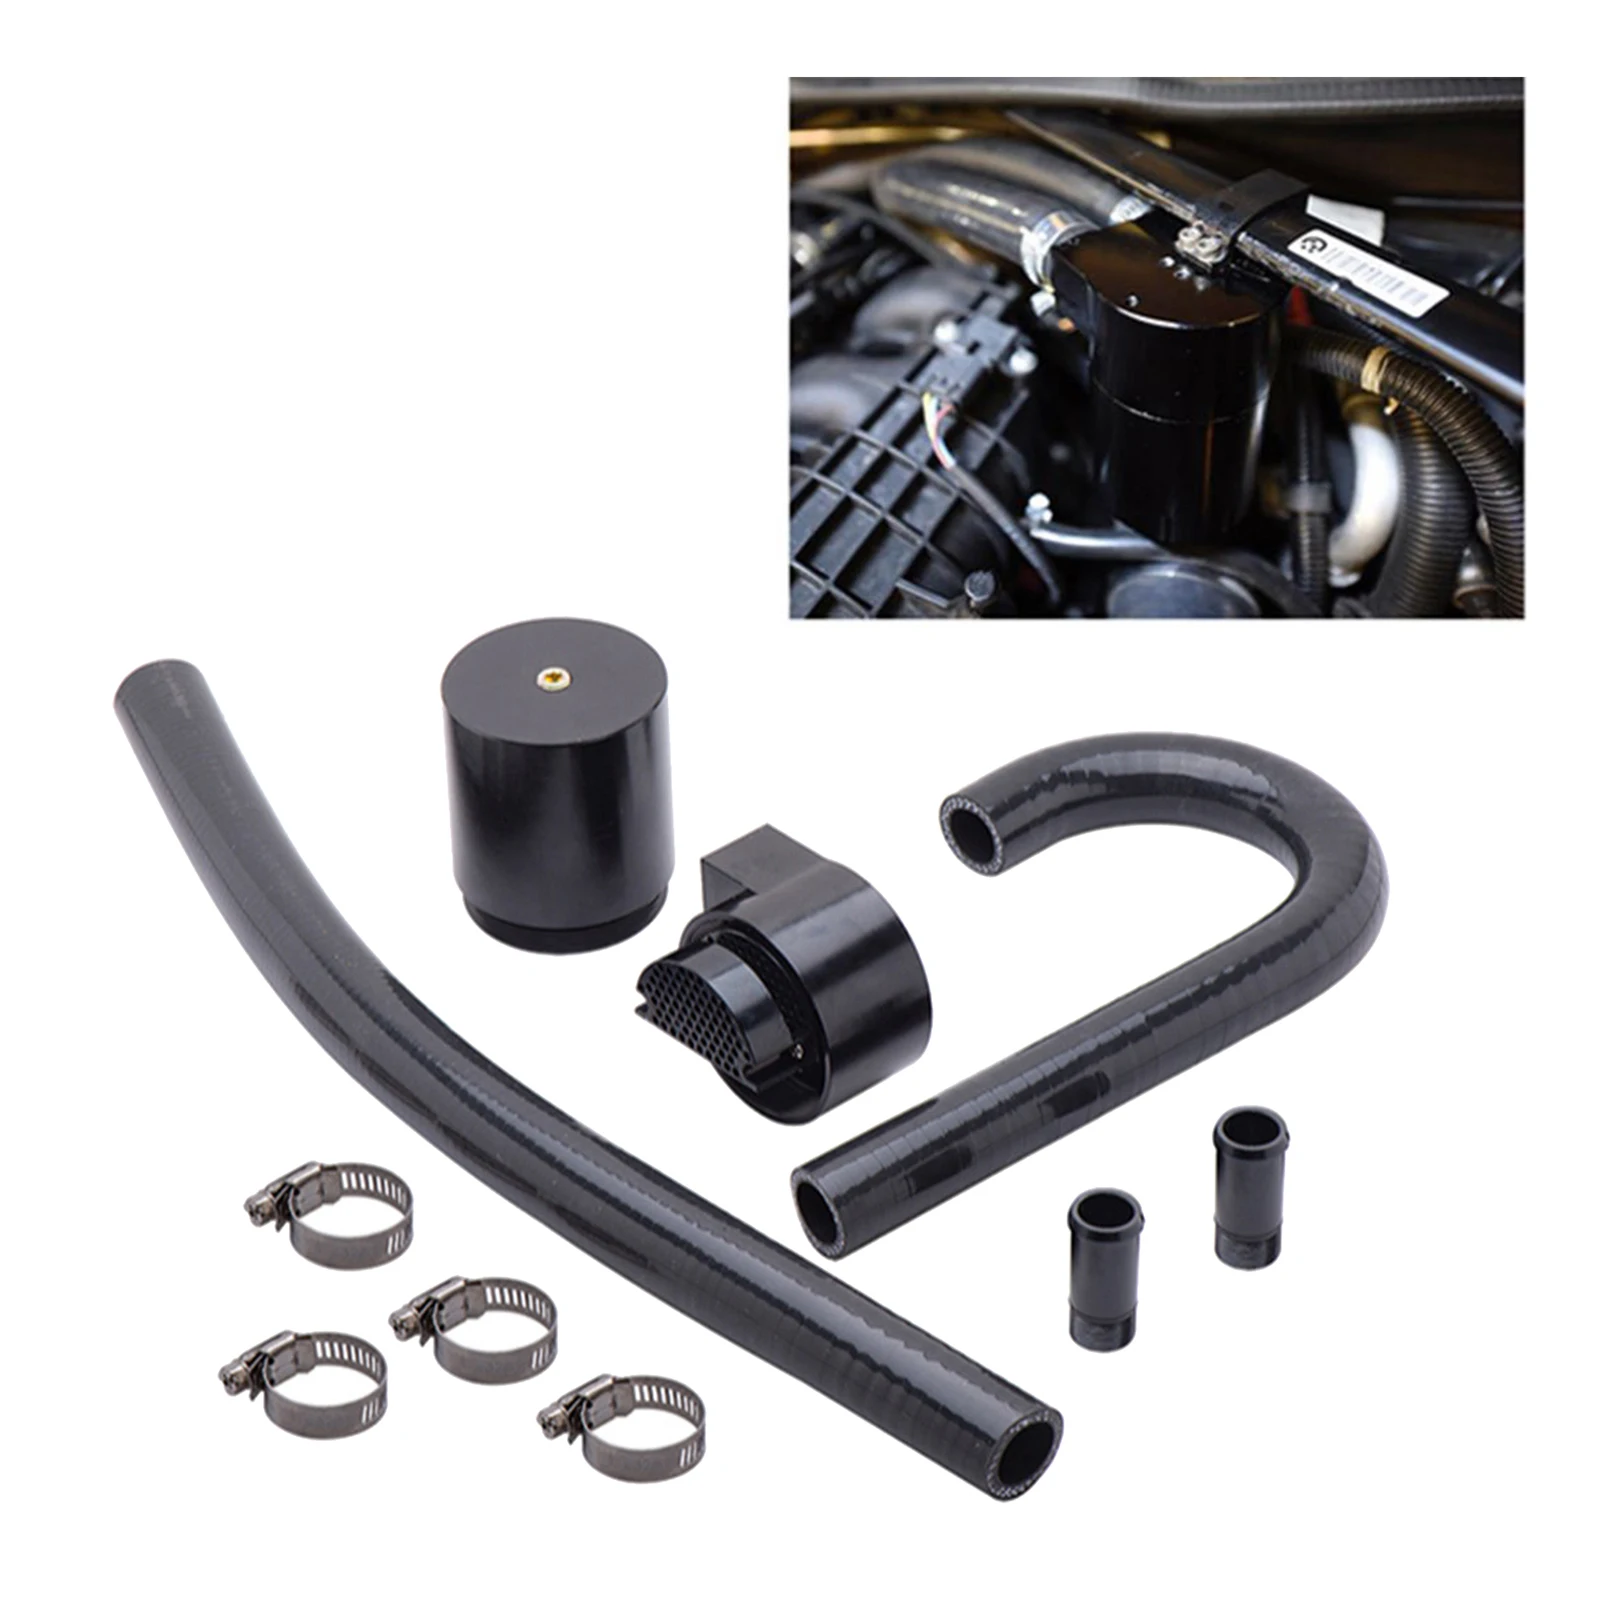 Oil Reservoir Catch Kit Replaces for  N54 2006-2010 Parts Accessories